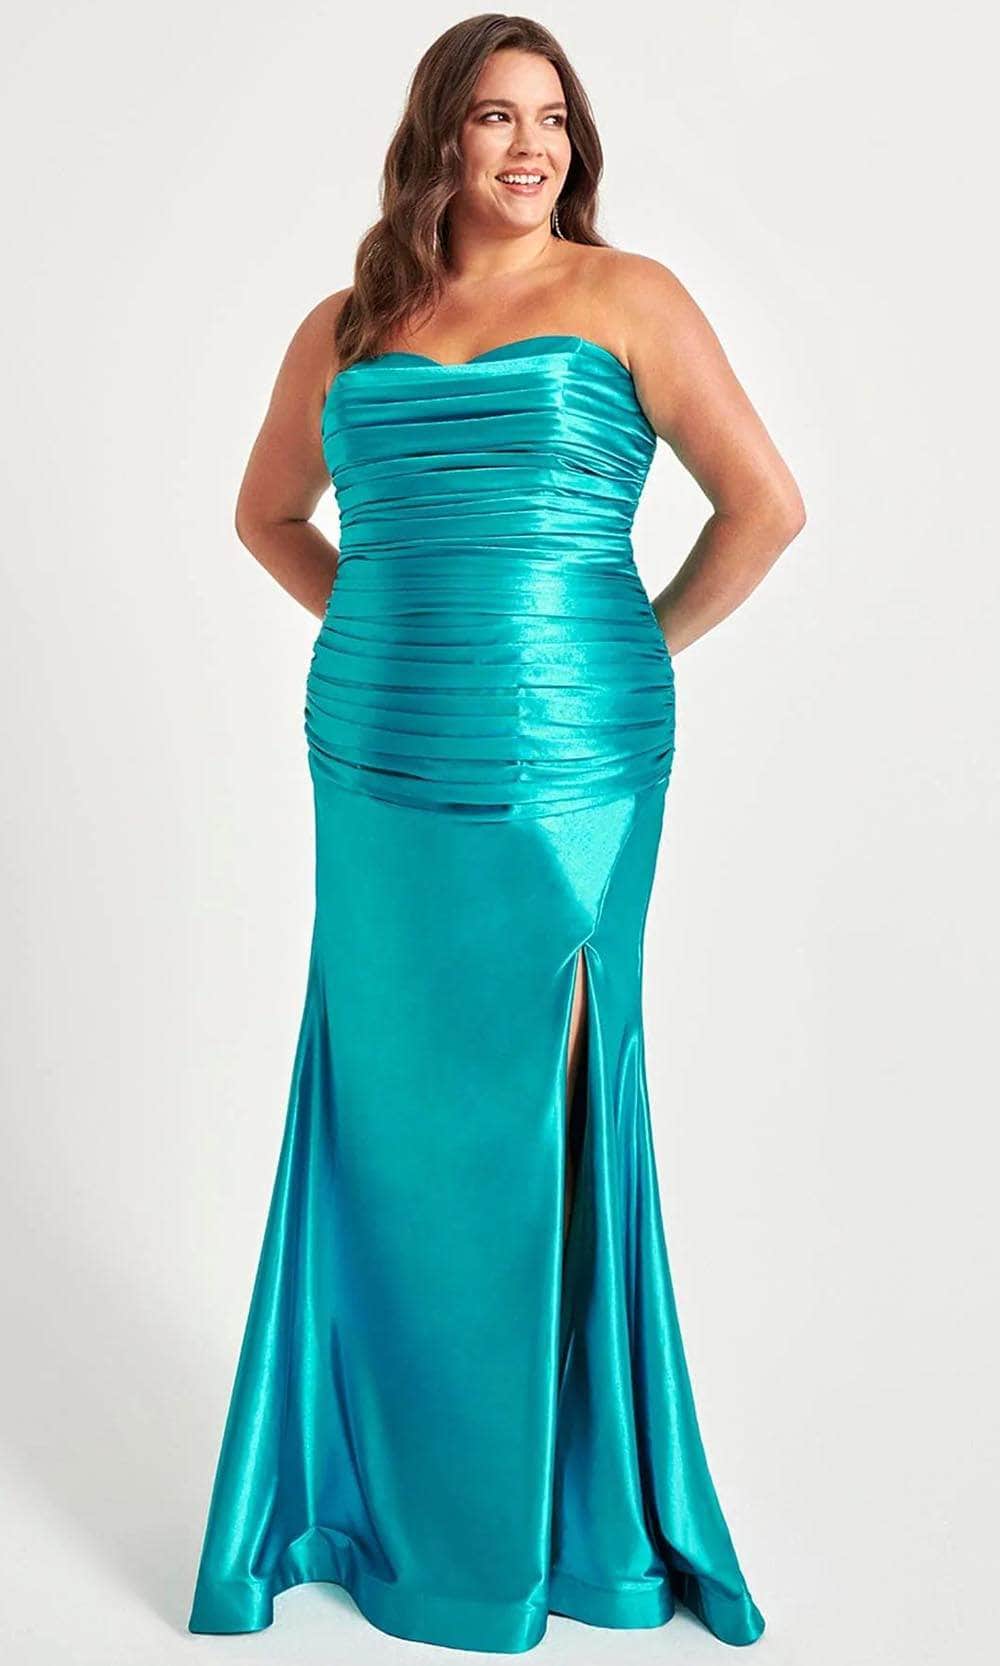 Faviana 9545 - Pleated Bodice Strapless Prom Gown
